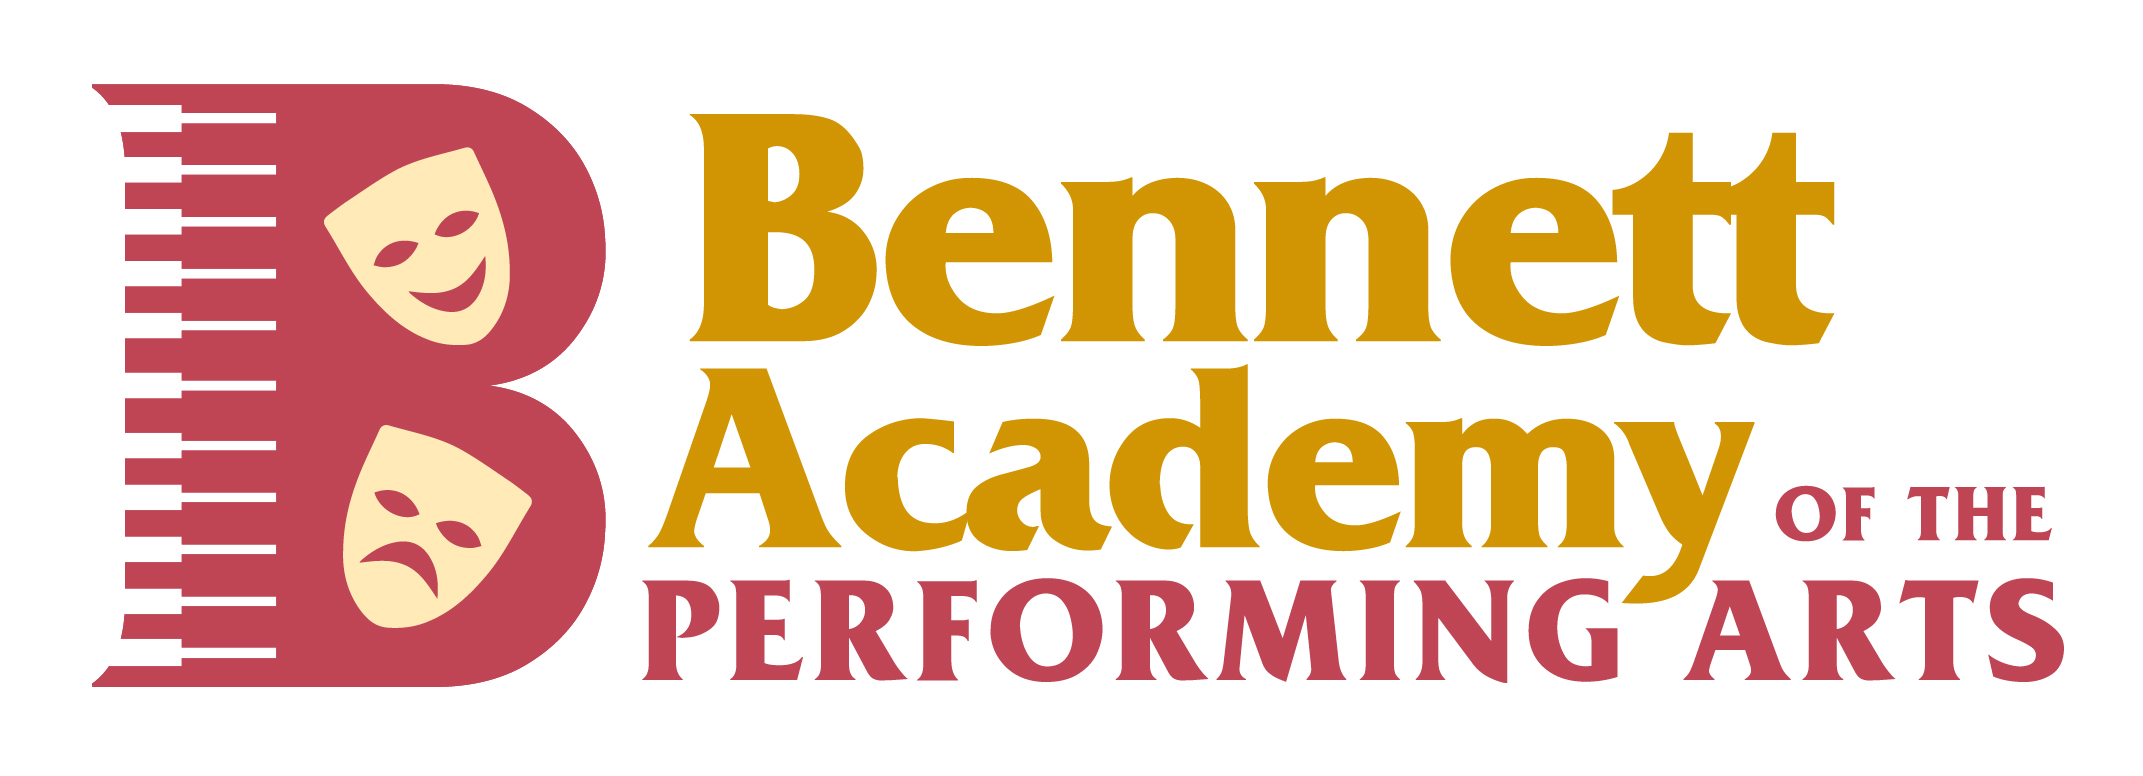 Bennett Academy of the Performing Arts